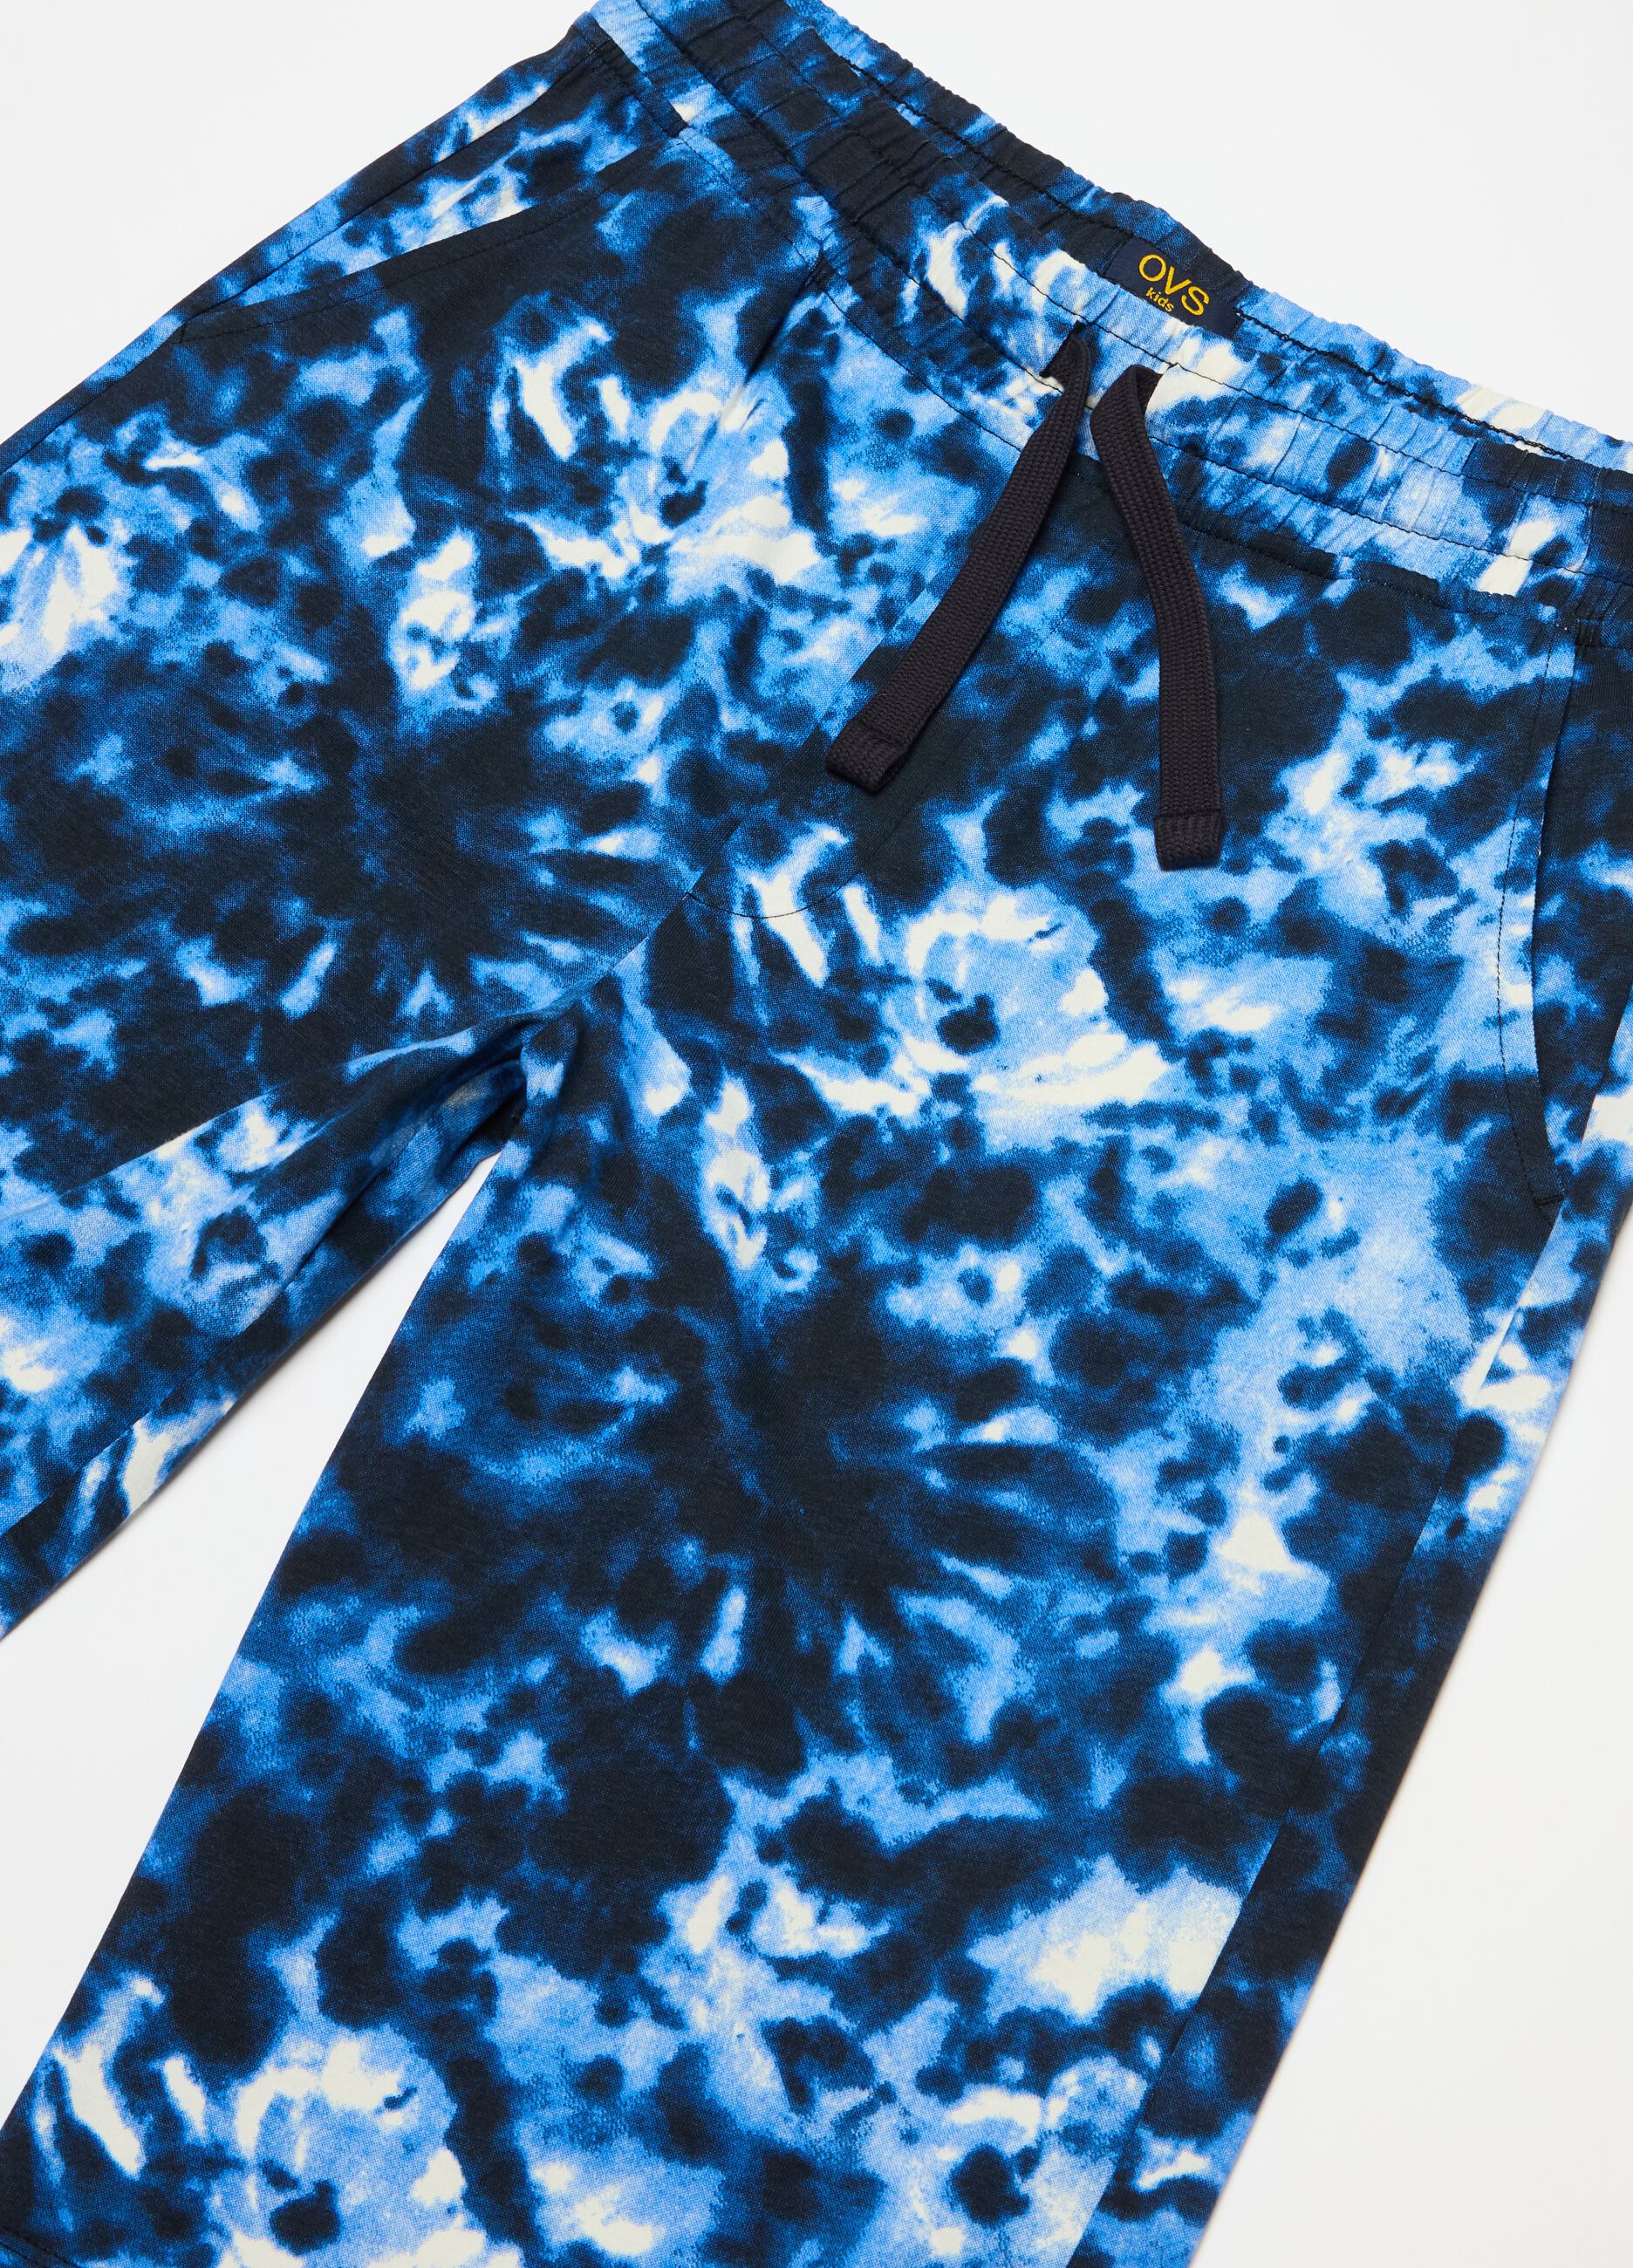 Bermuda joggers in tie-dye French terry